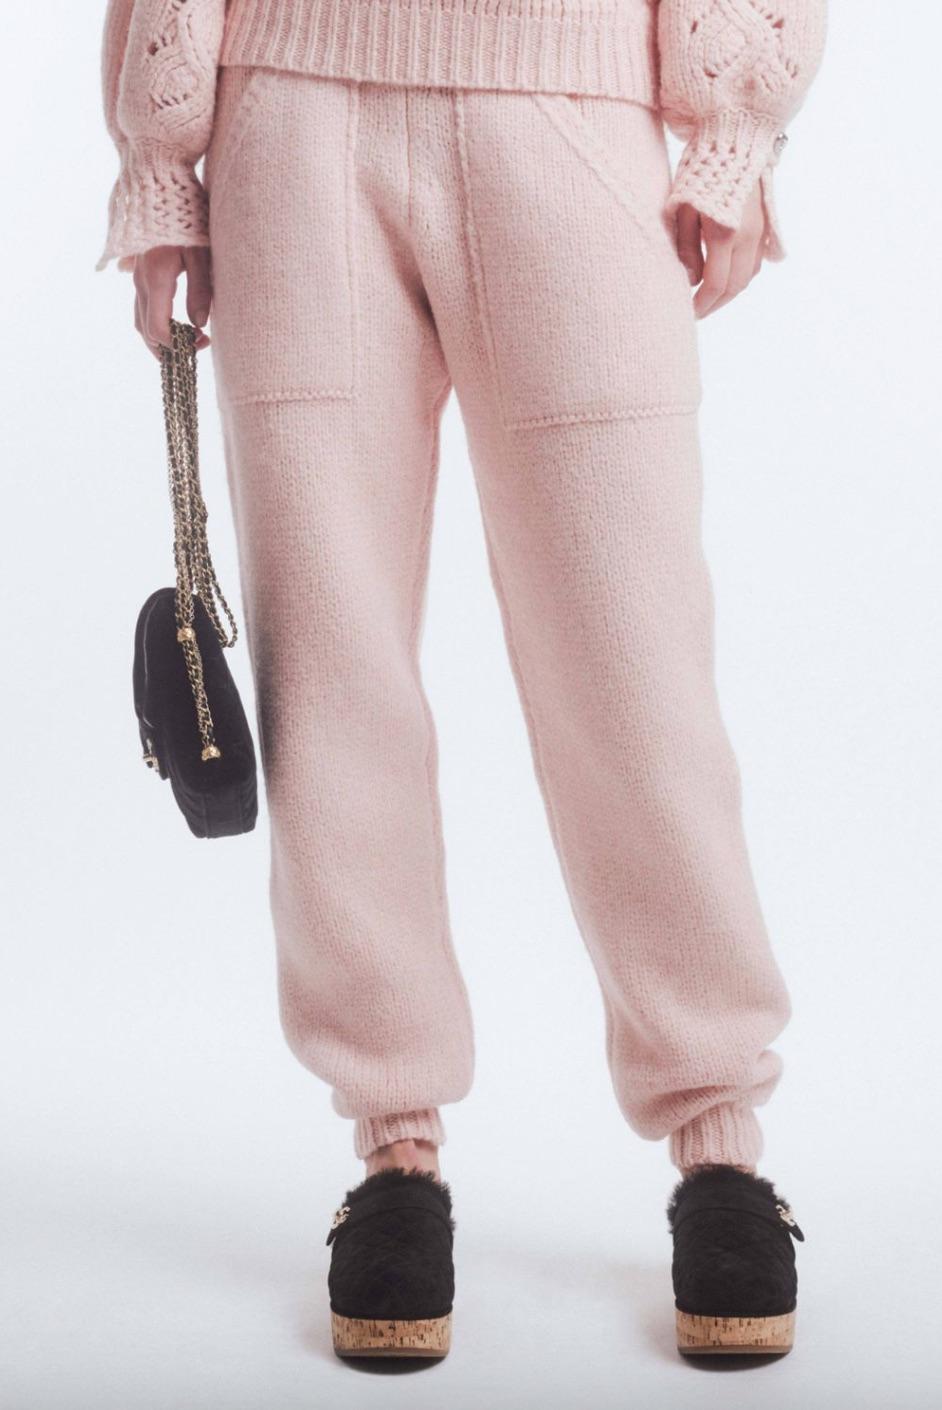 The Fall/Winter 2021-22 Pre-collection by Chanel brings a delightful addition to your wardrobe with the cute and cozy pink knit sweatpants. Expertly crafted from a luxurious blend of wool and alpaca, these sweatpants provide unparalleled comfort and